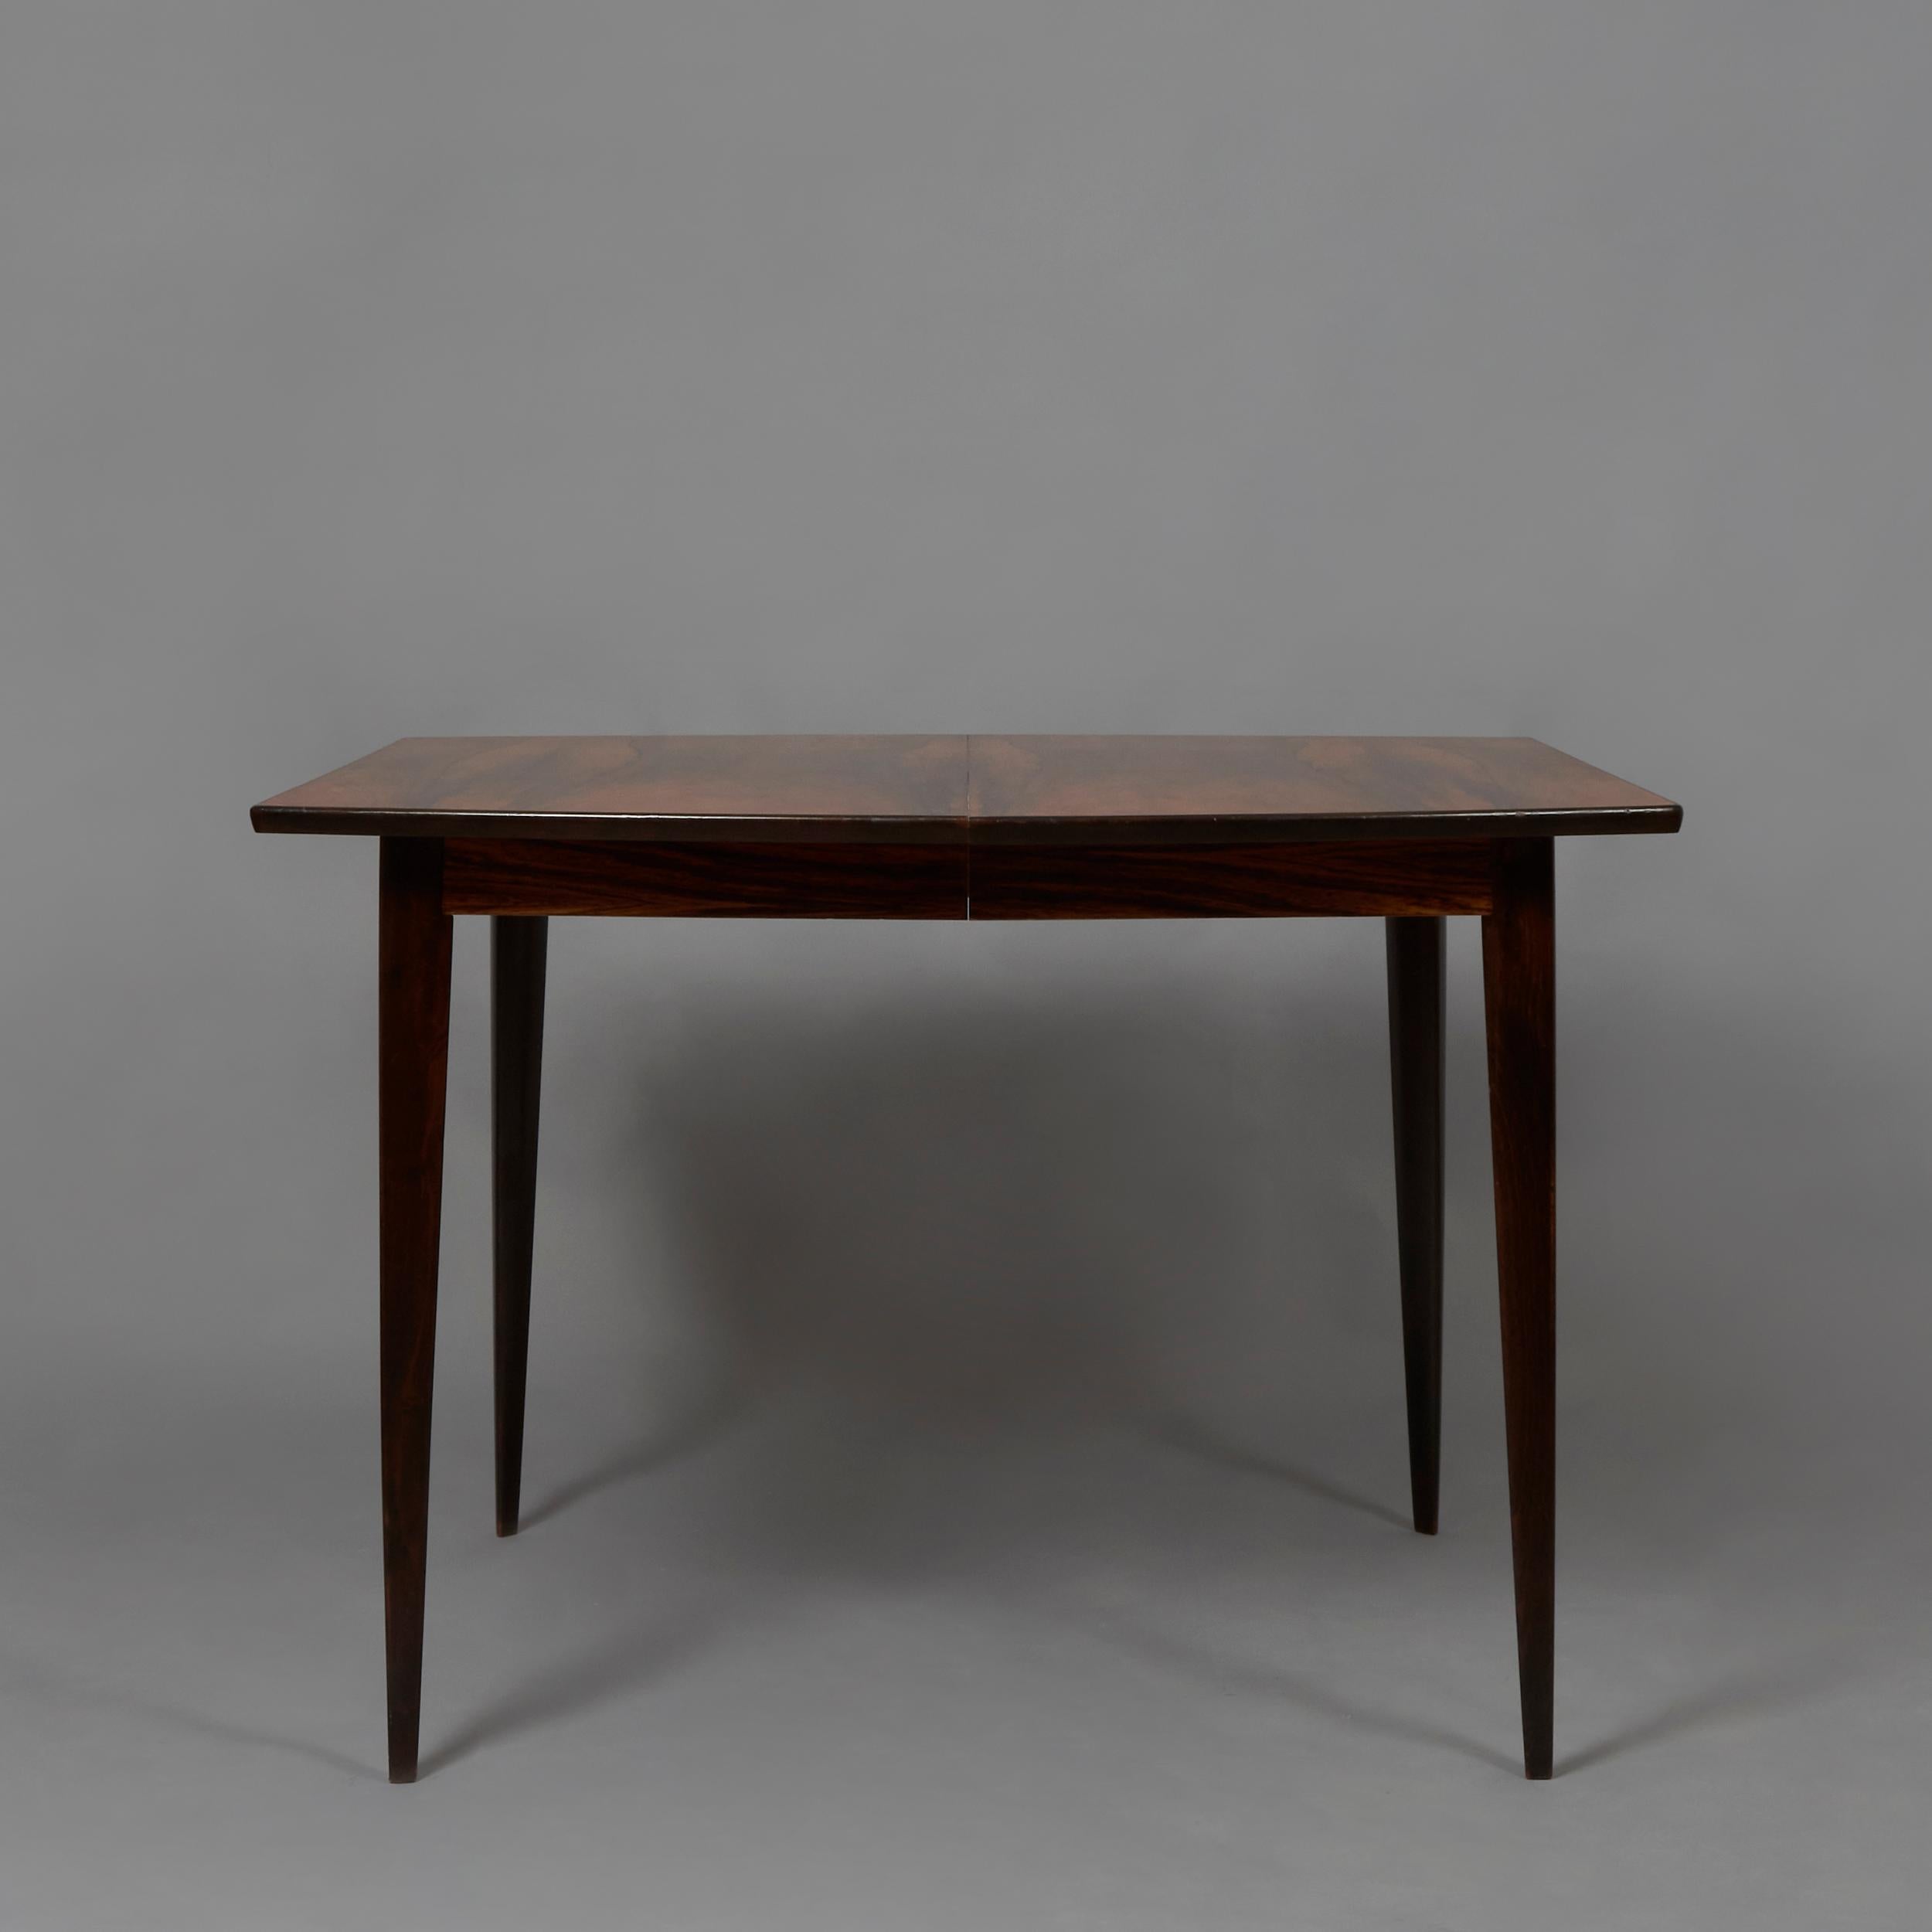 Extensible dining table in an original Squared - rounded shape made in Rosewood with a highly contrasted grain. Excellent Restored Condition. Sweden, 1960s.
The table can be extended 70 cm (27,55 in.) with two wooden extensions. 

